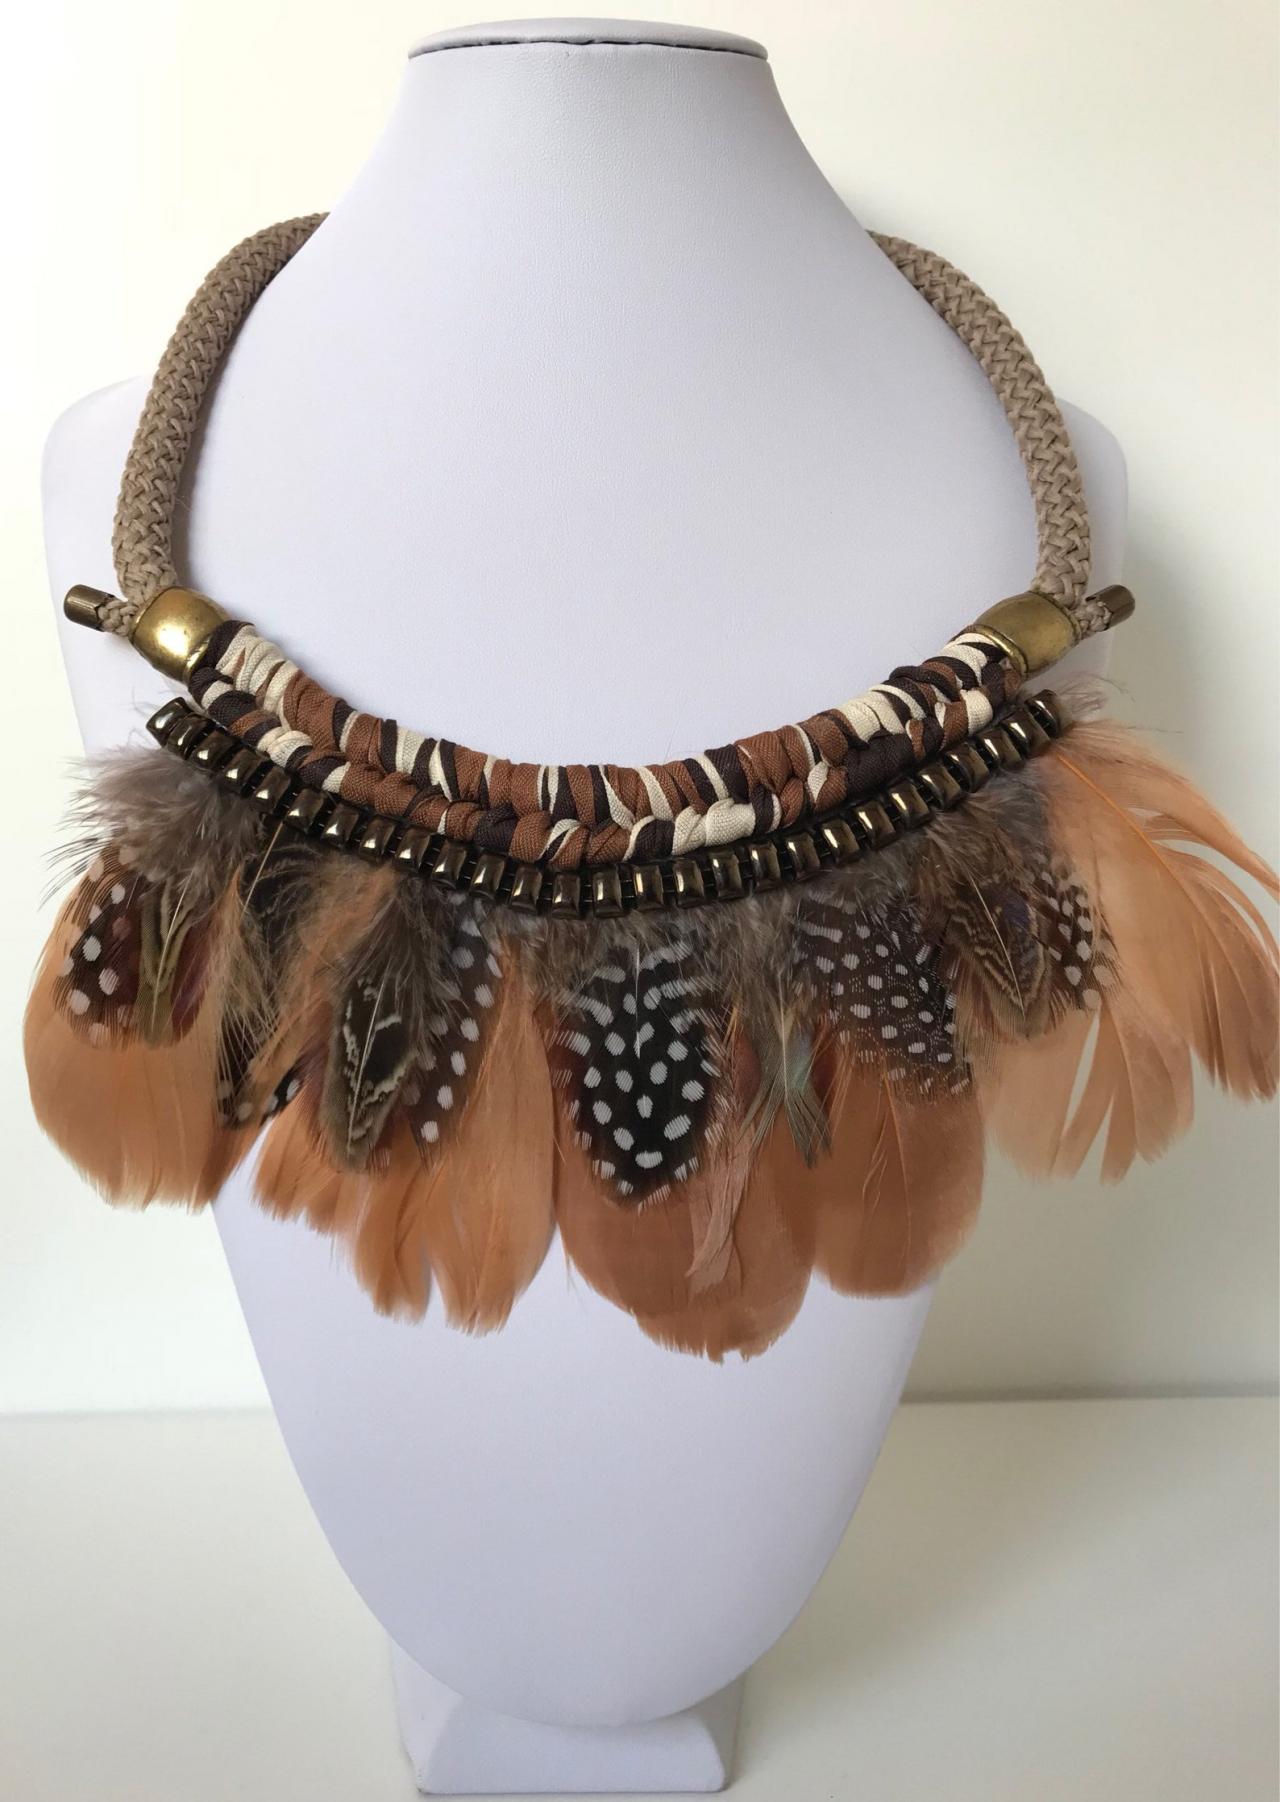 Feathers Necklace 263- Brown Goose Feathers Aged Gold Boho Chic Jewelry Necklace Gift